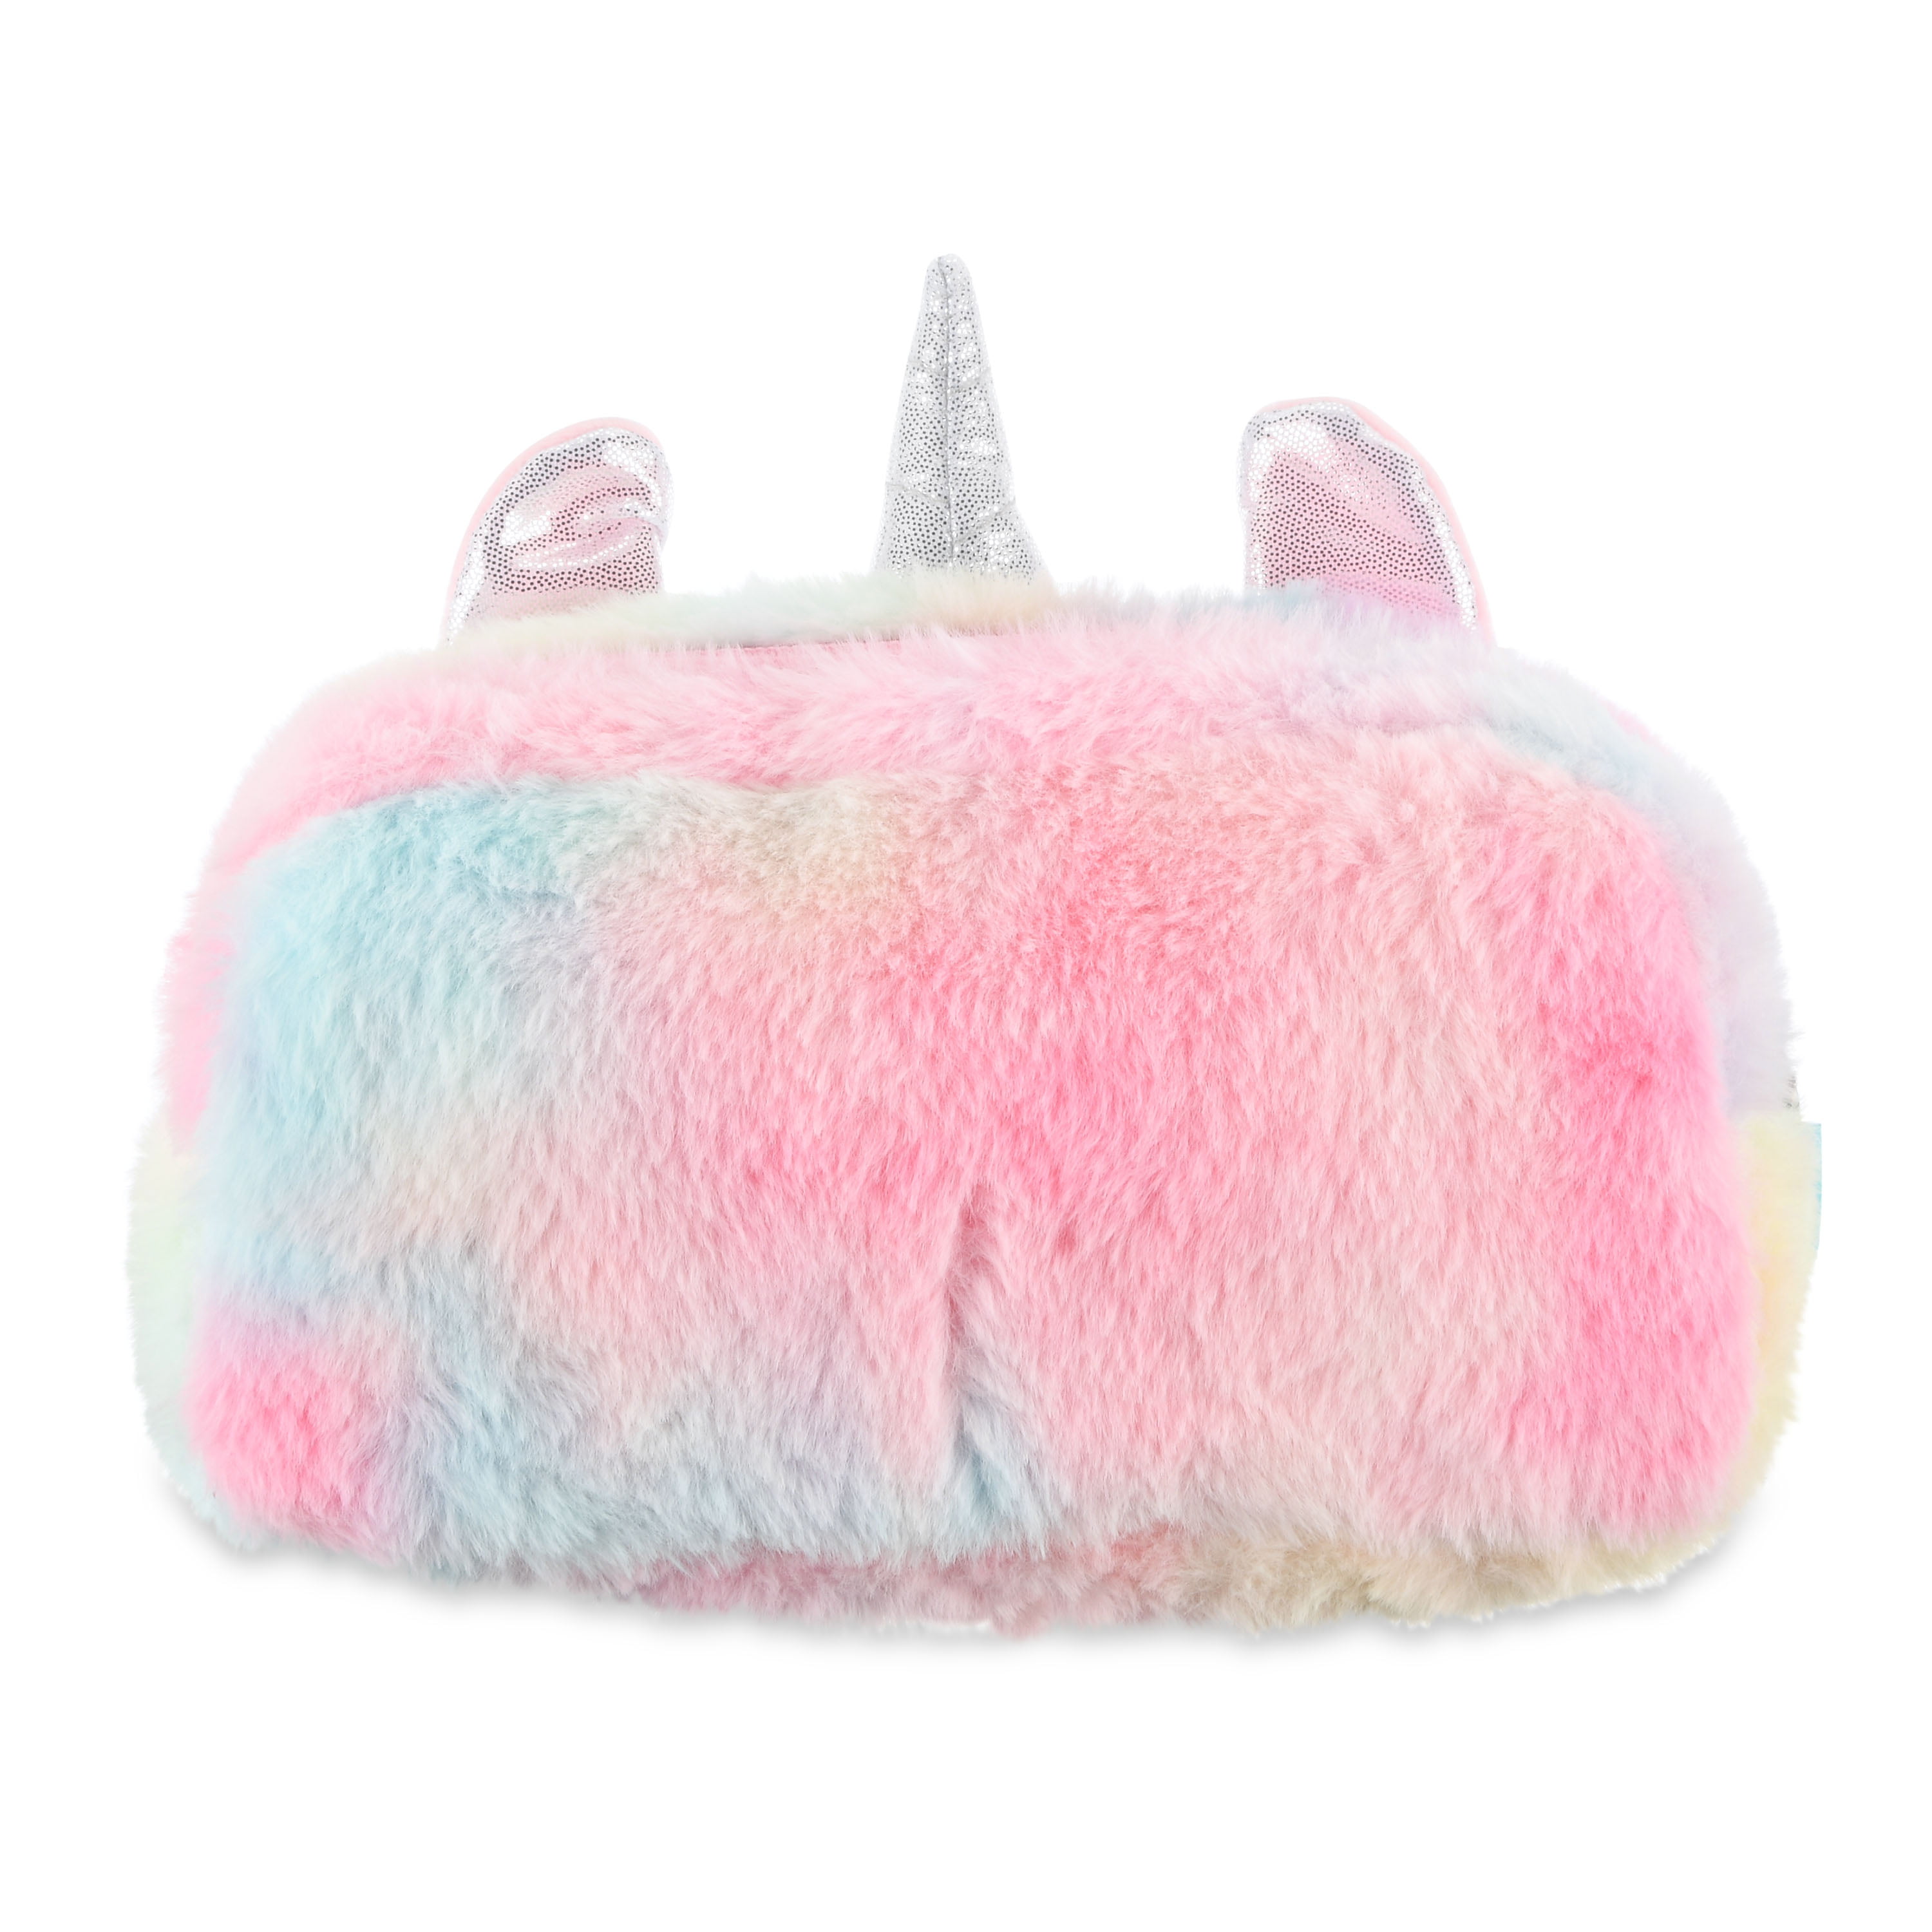 China Factory Rabow Color Velvet Cloth Storage Pen Bags, Fluffy Pen &  Pencil Case with Zipper, Office & School Supplies, Unicorn 220x100mm in  bulk online 